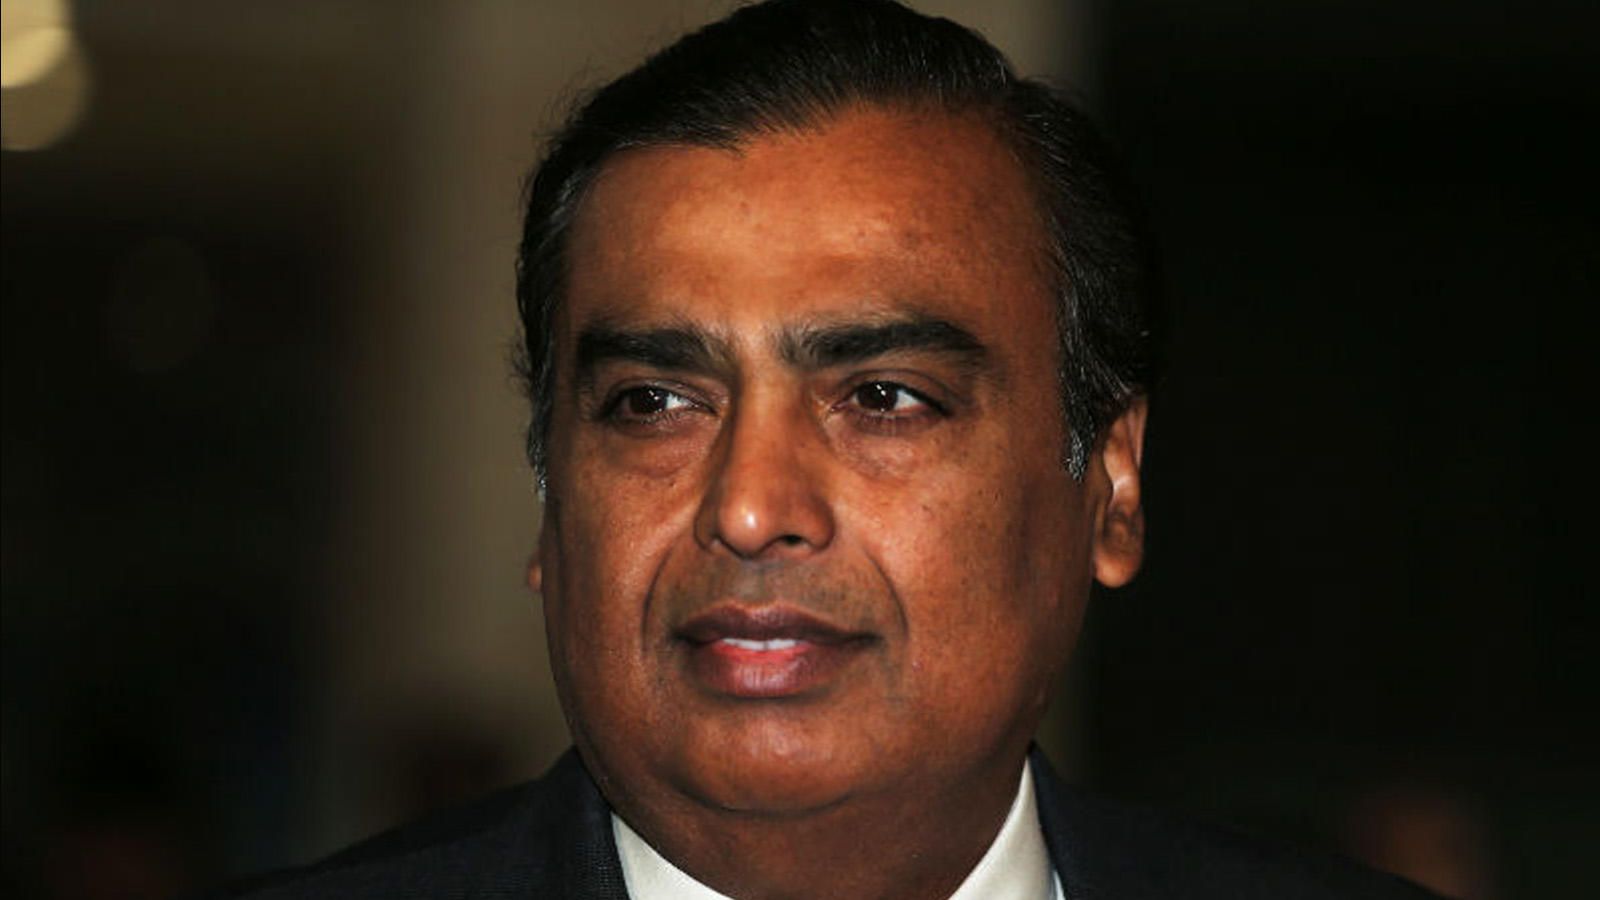 For the 11th year in a row, Mukesh Ambani keeps salary capped at